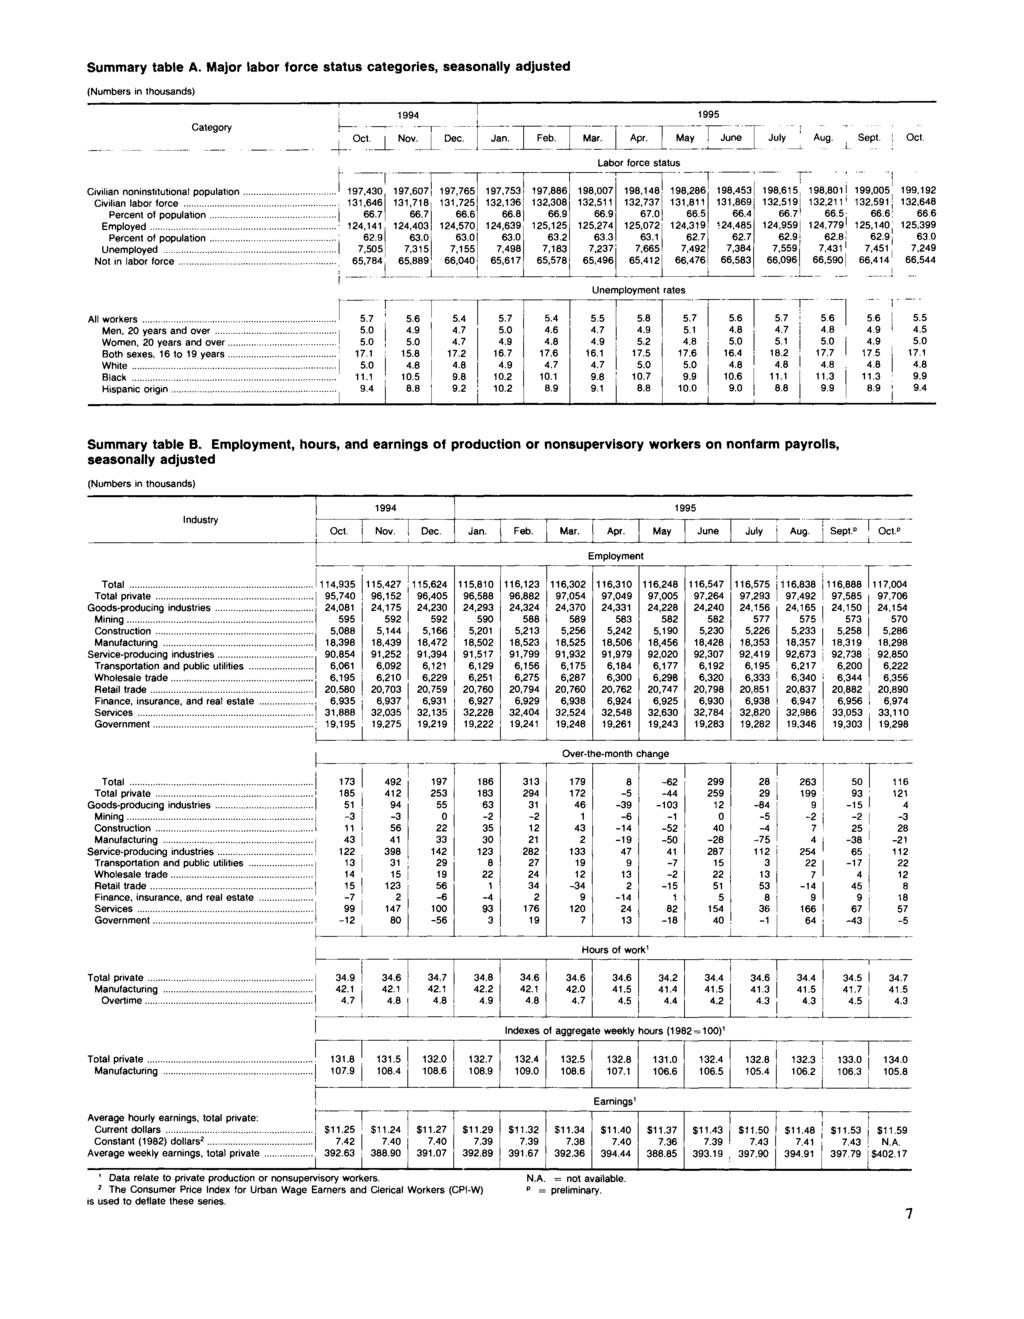 Summary table A. Major labor force status categories, seasonally adjusted (Numbers in thousands) Category Nov. i Dec. Mar. Apr. May Labor force status July Civilian noninstitutional population.